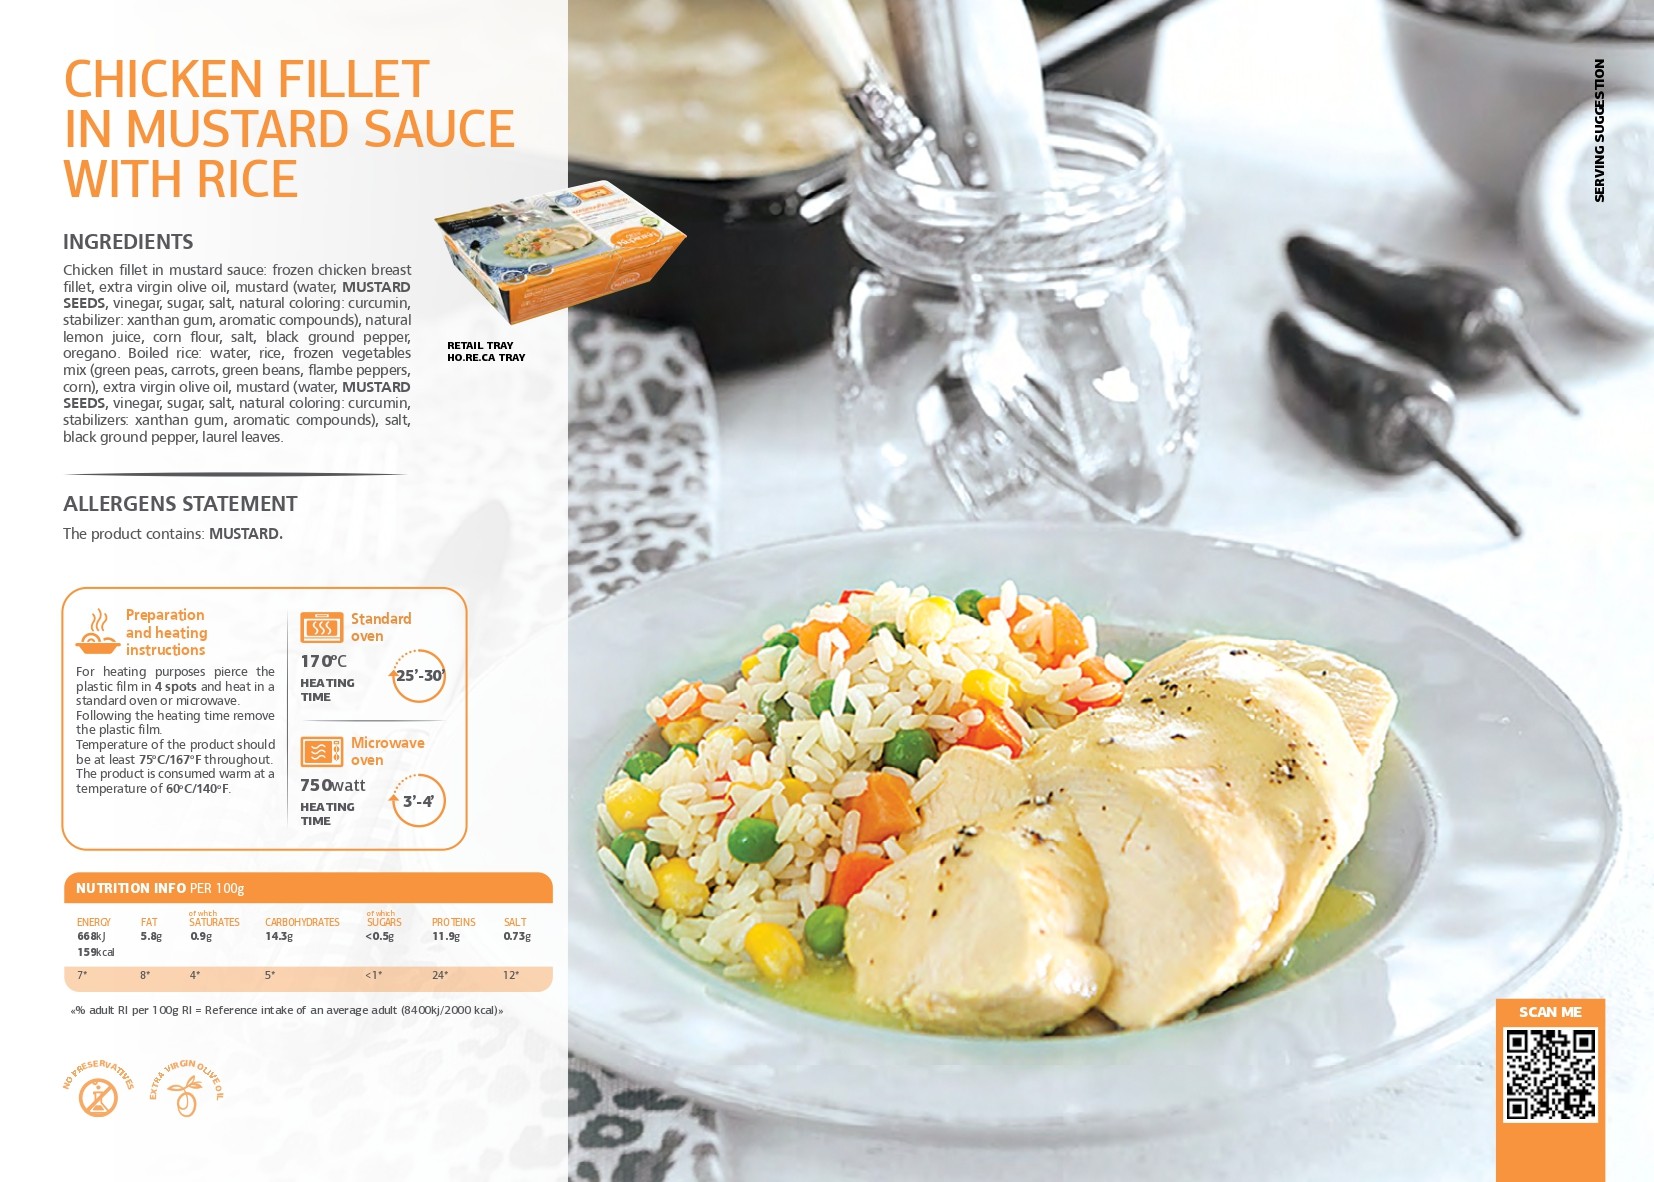 SK - Chicken fillet in mustard sauce with rice pdf image